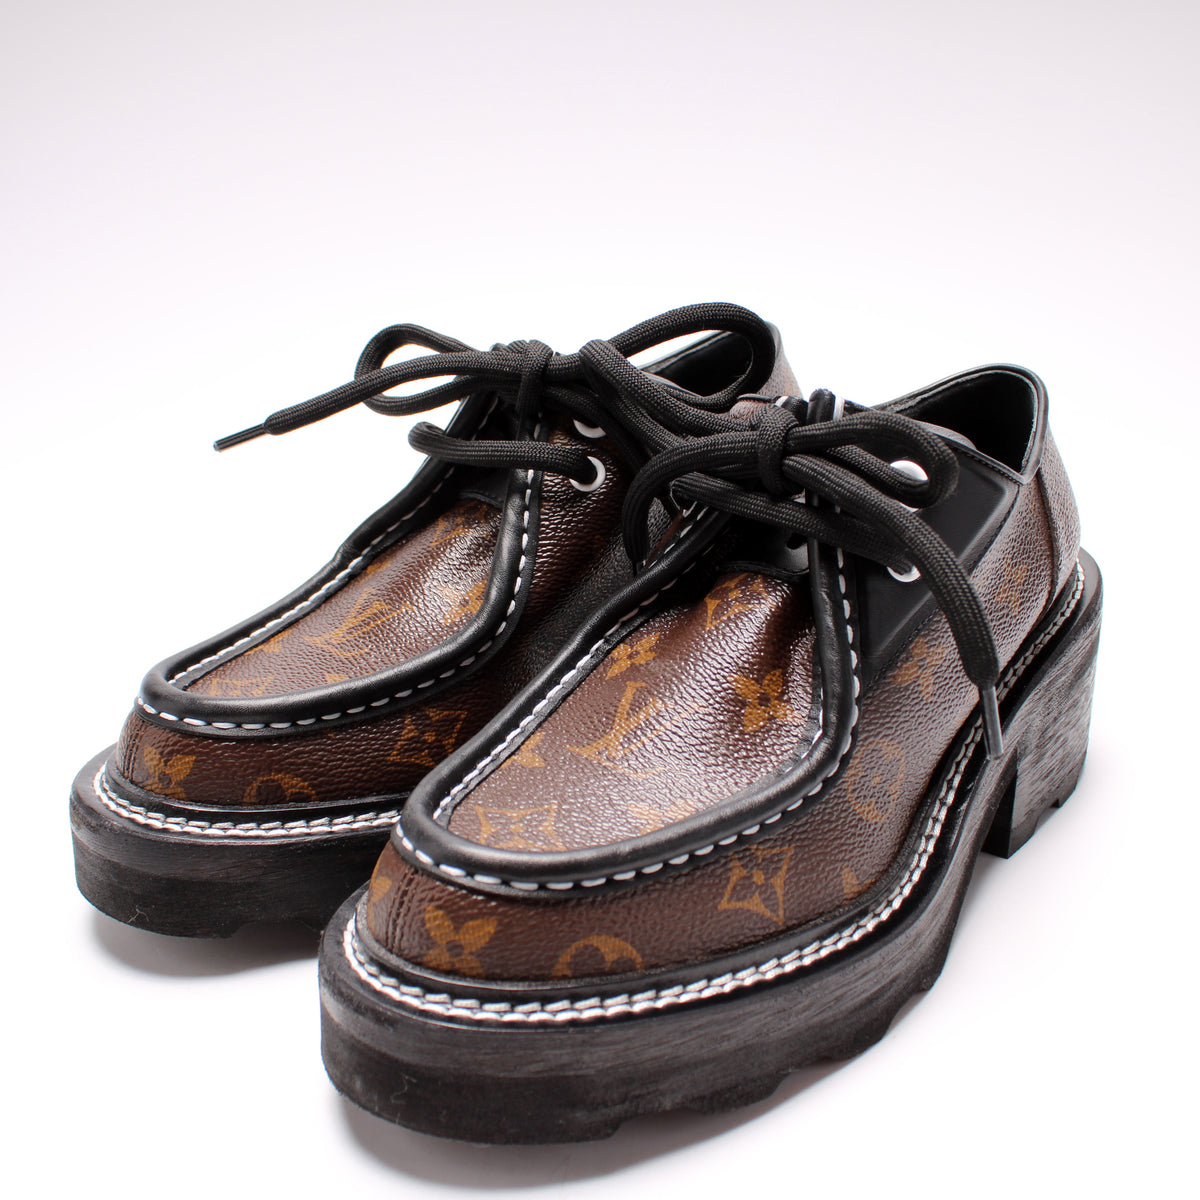 Louis Vuitton Beaubourg Derby Shoes: First Impressions / Why I Bought Them  